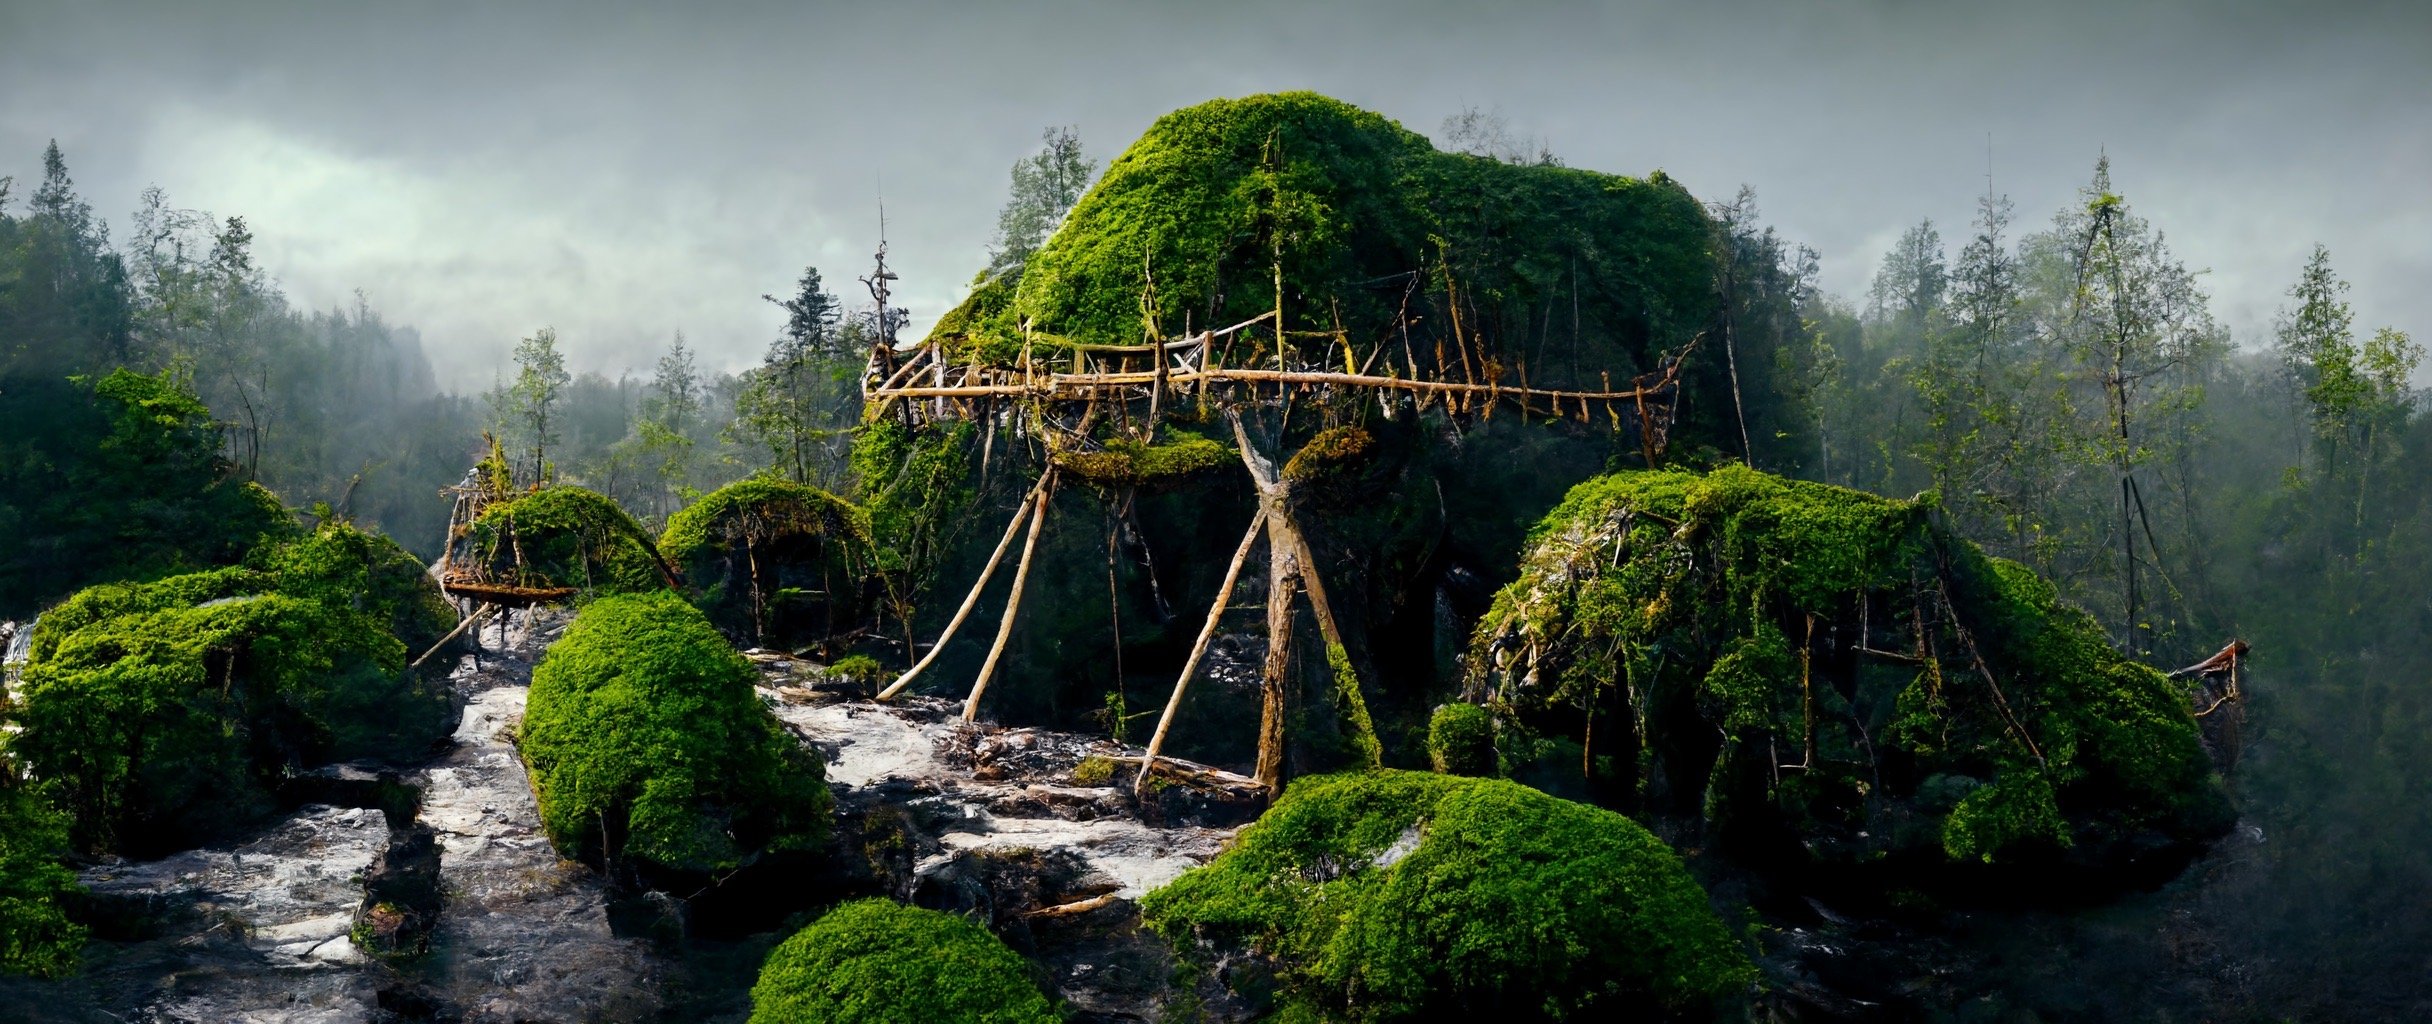 017fe851-7b27-43d6-8a82-c31c99d9cebe_S3RAPH_httpss.mj.runkc7Sd1__Ewok_style_tree_forts_and_village_in_a_massive_forest._Moss_waterfalls_and_rope.JPG